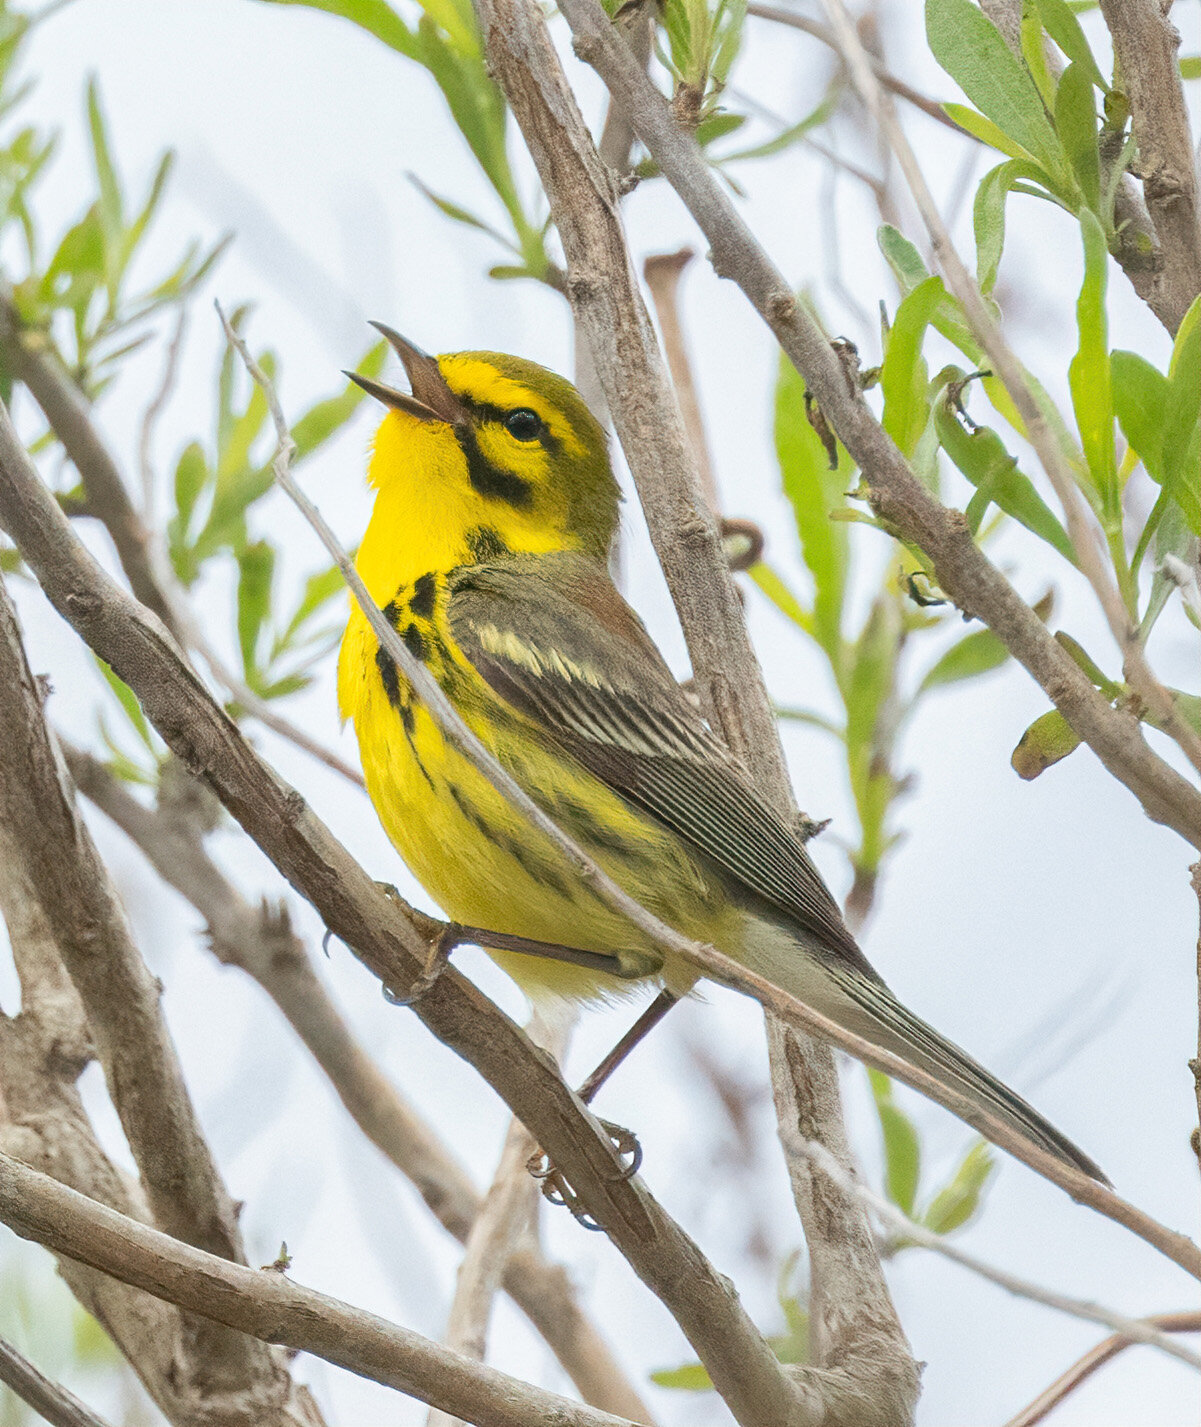 A singing Prairie Warbler delighted observers this week. Neotropical migrants, they nest on Nantucket.